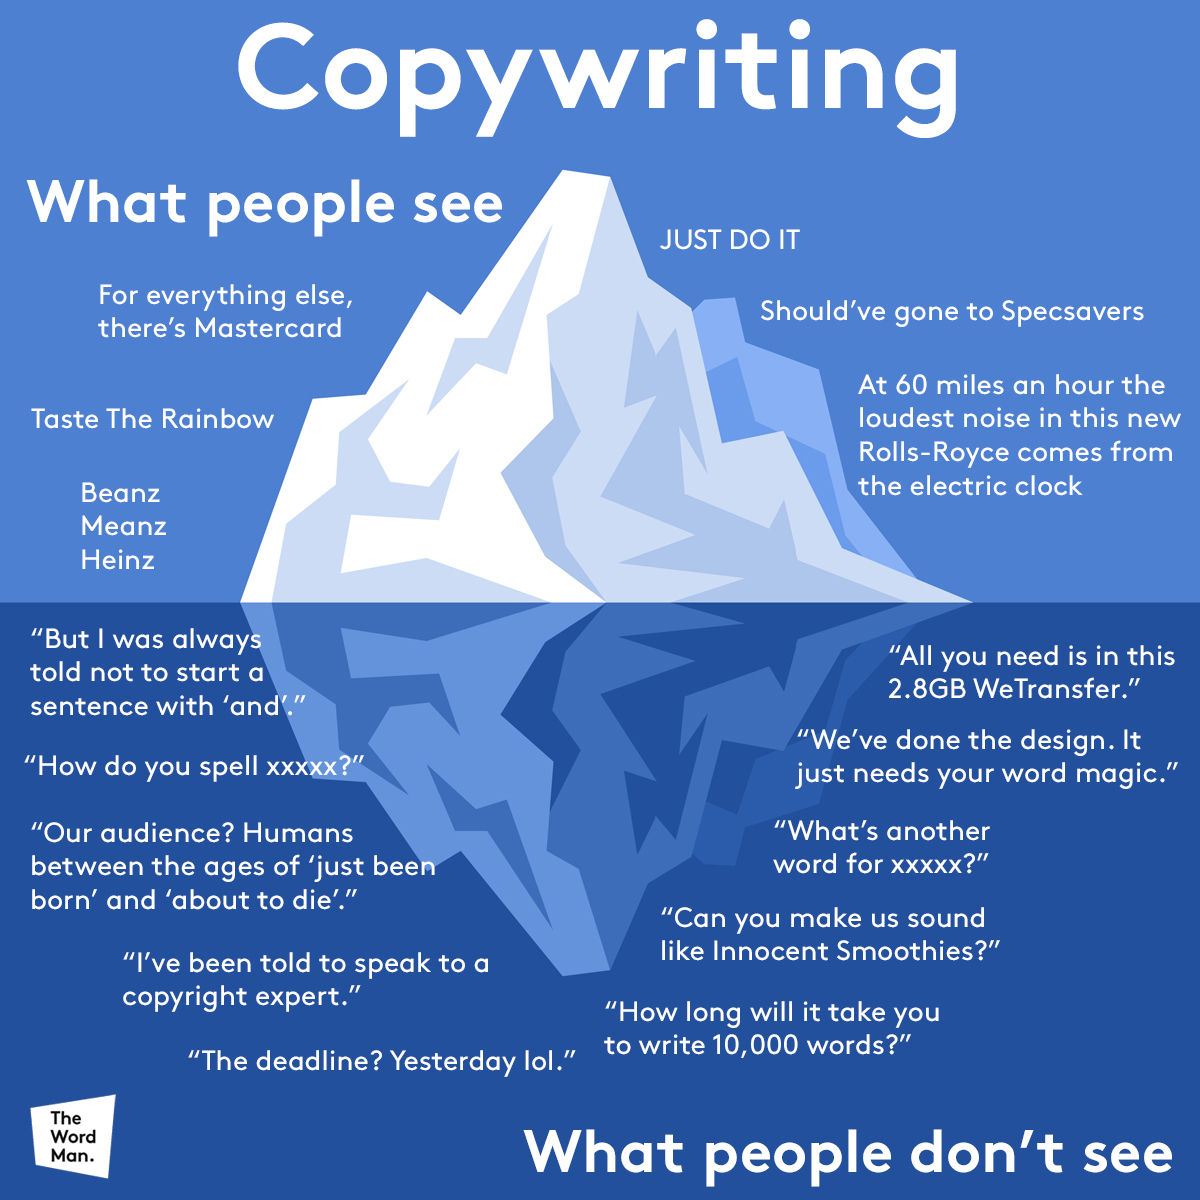 visual representation of what you see in copywriting shown at the tip of an iceberg (e.g. 'just do it' and 'taste the rainbow') vs what you don't see below the water (e.g. 'what's another word for xxxx?' and 'the deadline? yesterday lol')